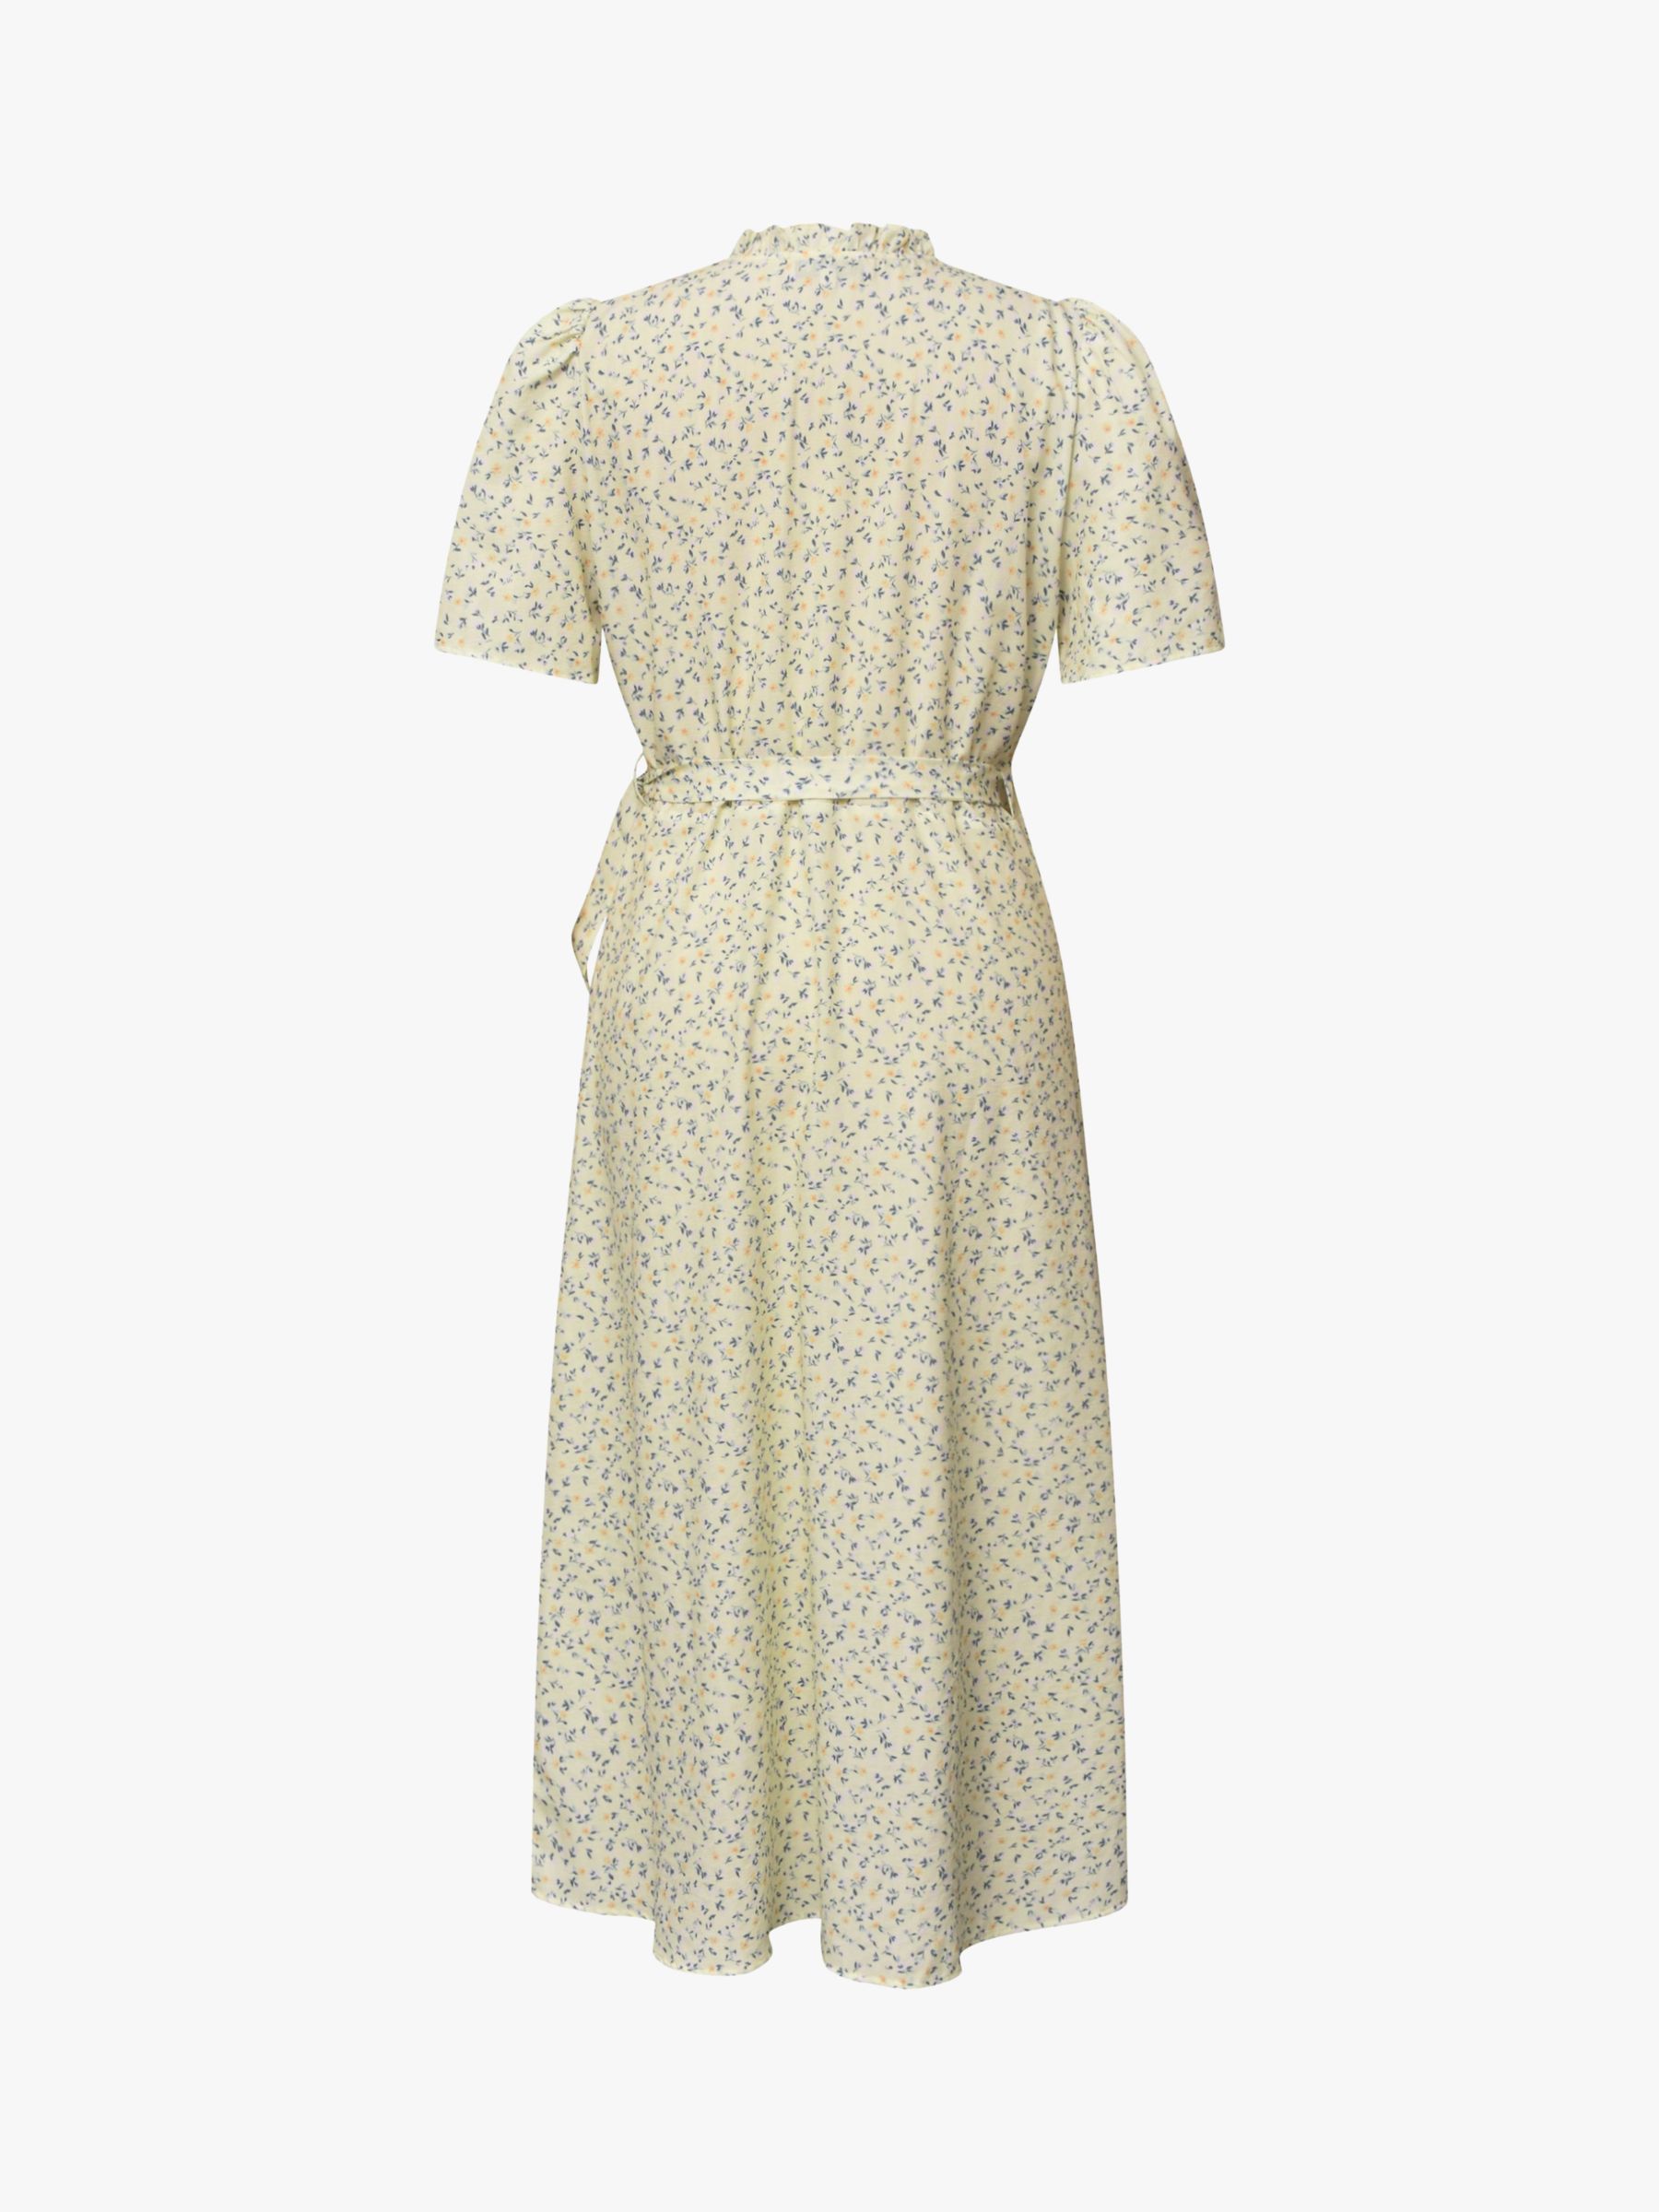 Buy A-VIEW Peony Wrap Dress Online at johnlewis.com